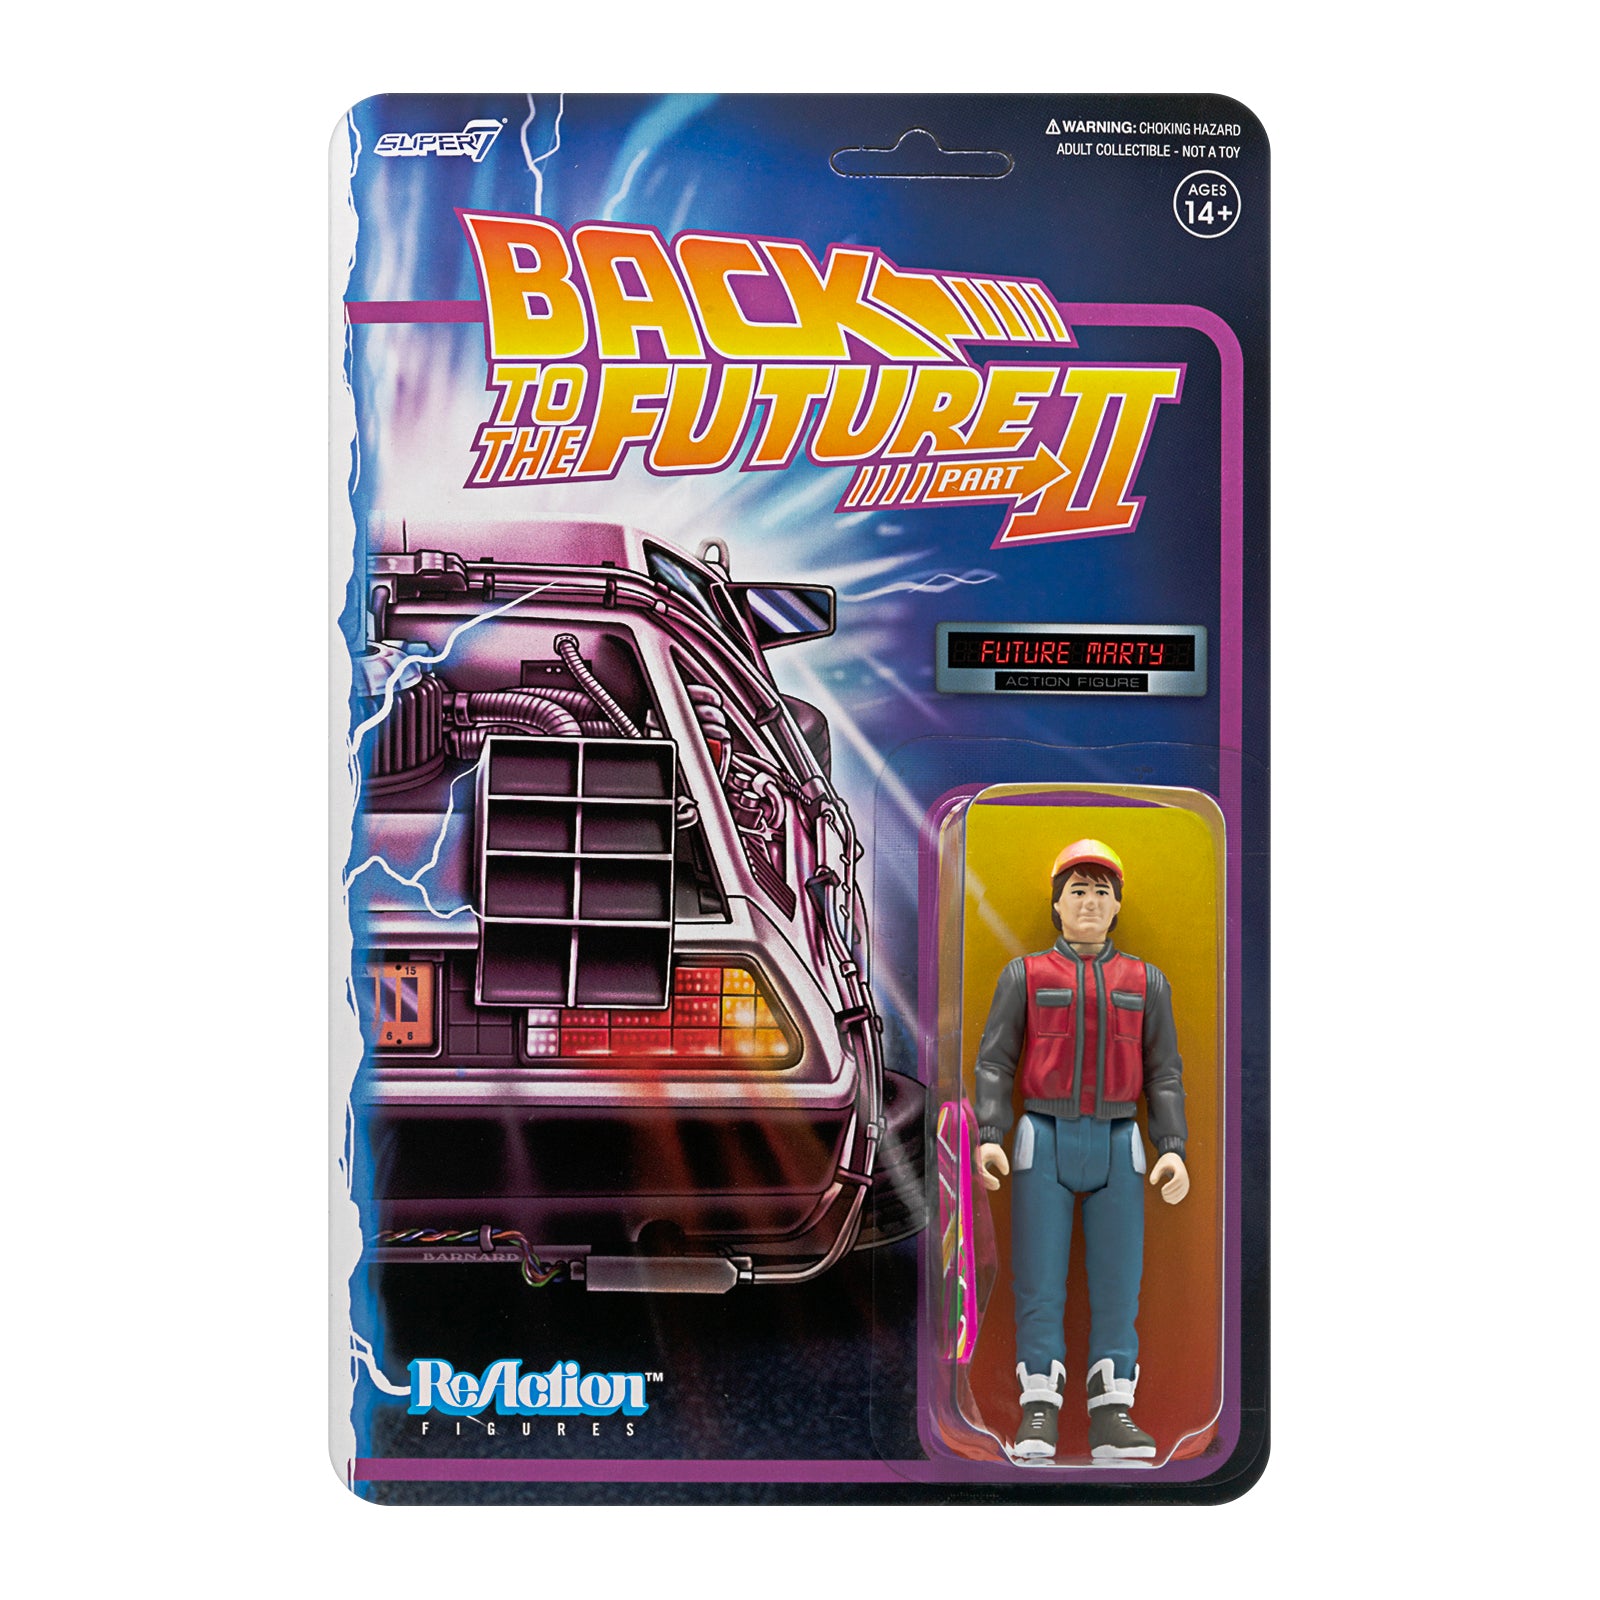 Back to the Future 2 ReAction Figure Wave 1 - Marty McFly Future